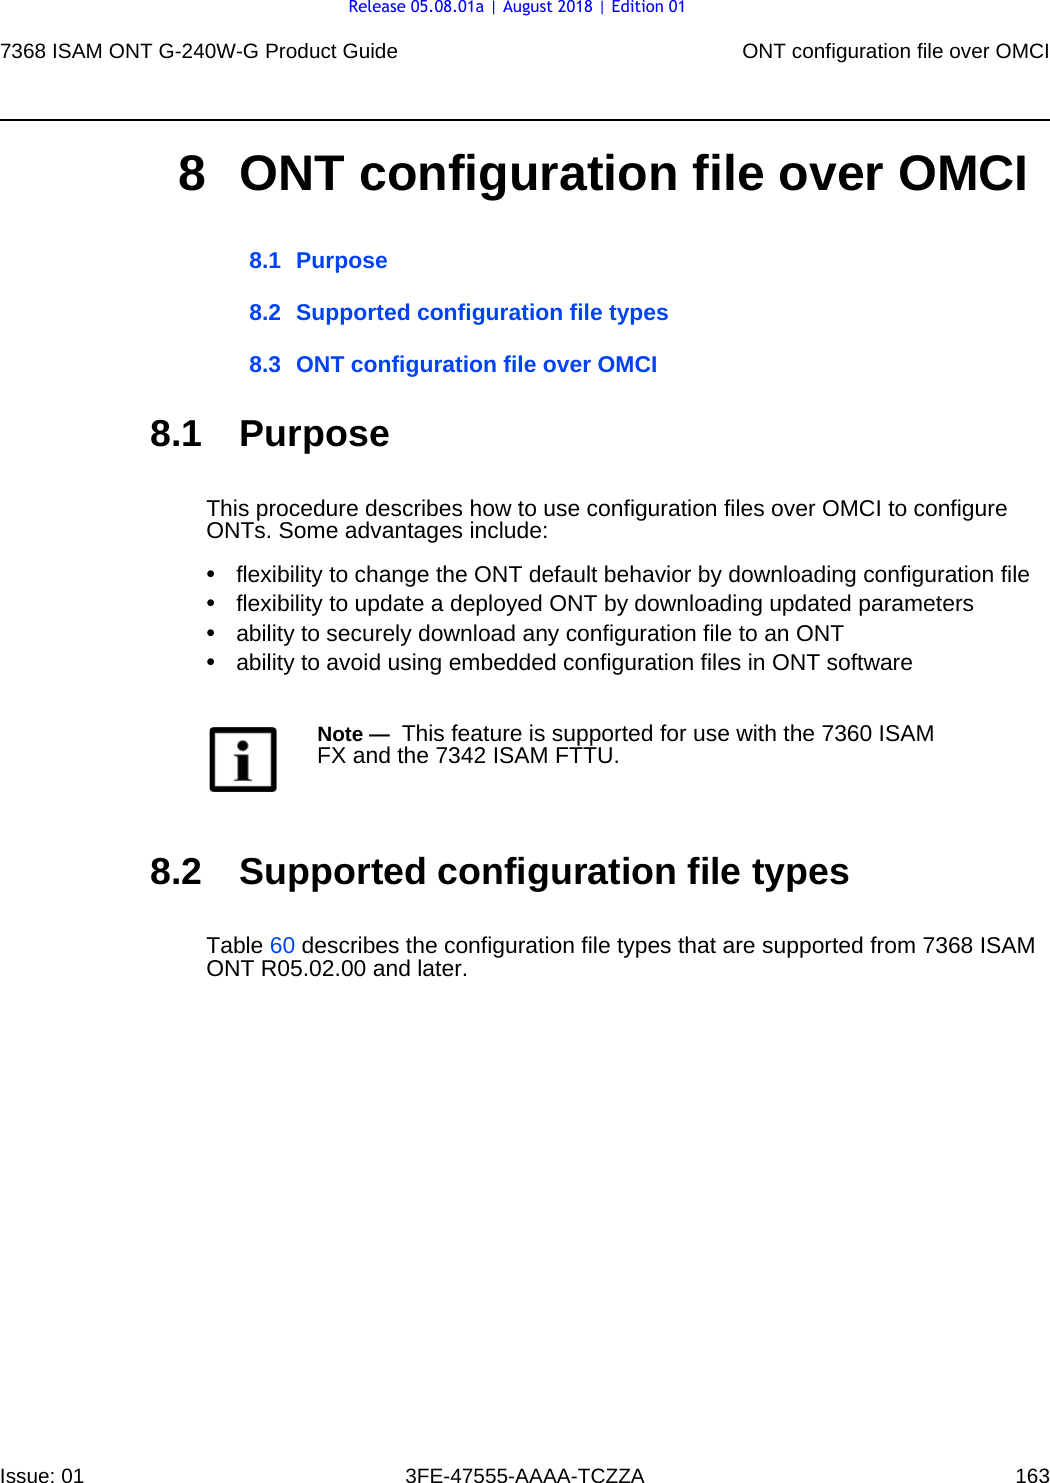 7368 ISAM ONT G-240W-G Product Guide ONT configuration file over OMCIIssue: 01 3FE-47555-AAAA-TCZZA 163 8 ONT configuration file over OMCI8.1 Purpose8.2 Supported configuration file types8.3 ONT configuration file over OMCI8.1 PurposeThis procedure describes how to use configuration files over OMCI to configure ONTs. Some advantages include:•flexibility to change the ONT default behavior by downloading configuration file•flexibility to update a deployed ONT by downloading updated parameters•ability to securely download any configuration file to an ONT•ability to avoid using embedded configuration files in ONT software8.2 Supported configuration file typesTable 60 describes the configuration file types that are supported from 7368 ISAM ONT R05.02.00 and later. Note —  This feature is supported for use with the 7360 ISAM FX and the 7342 ISAM FTTU.Release 05.08.01a | August 2018 | Edition 01